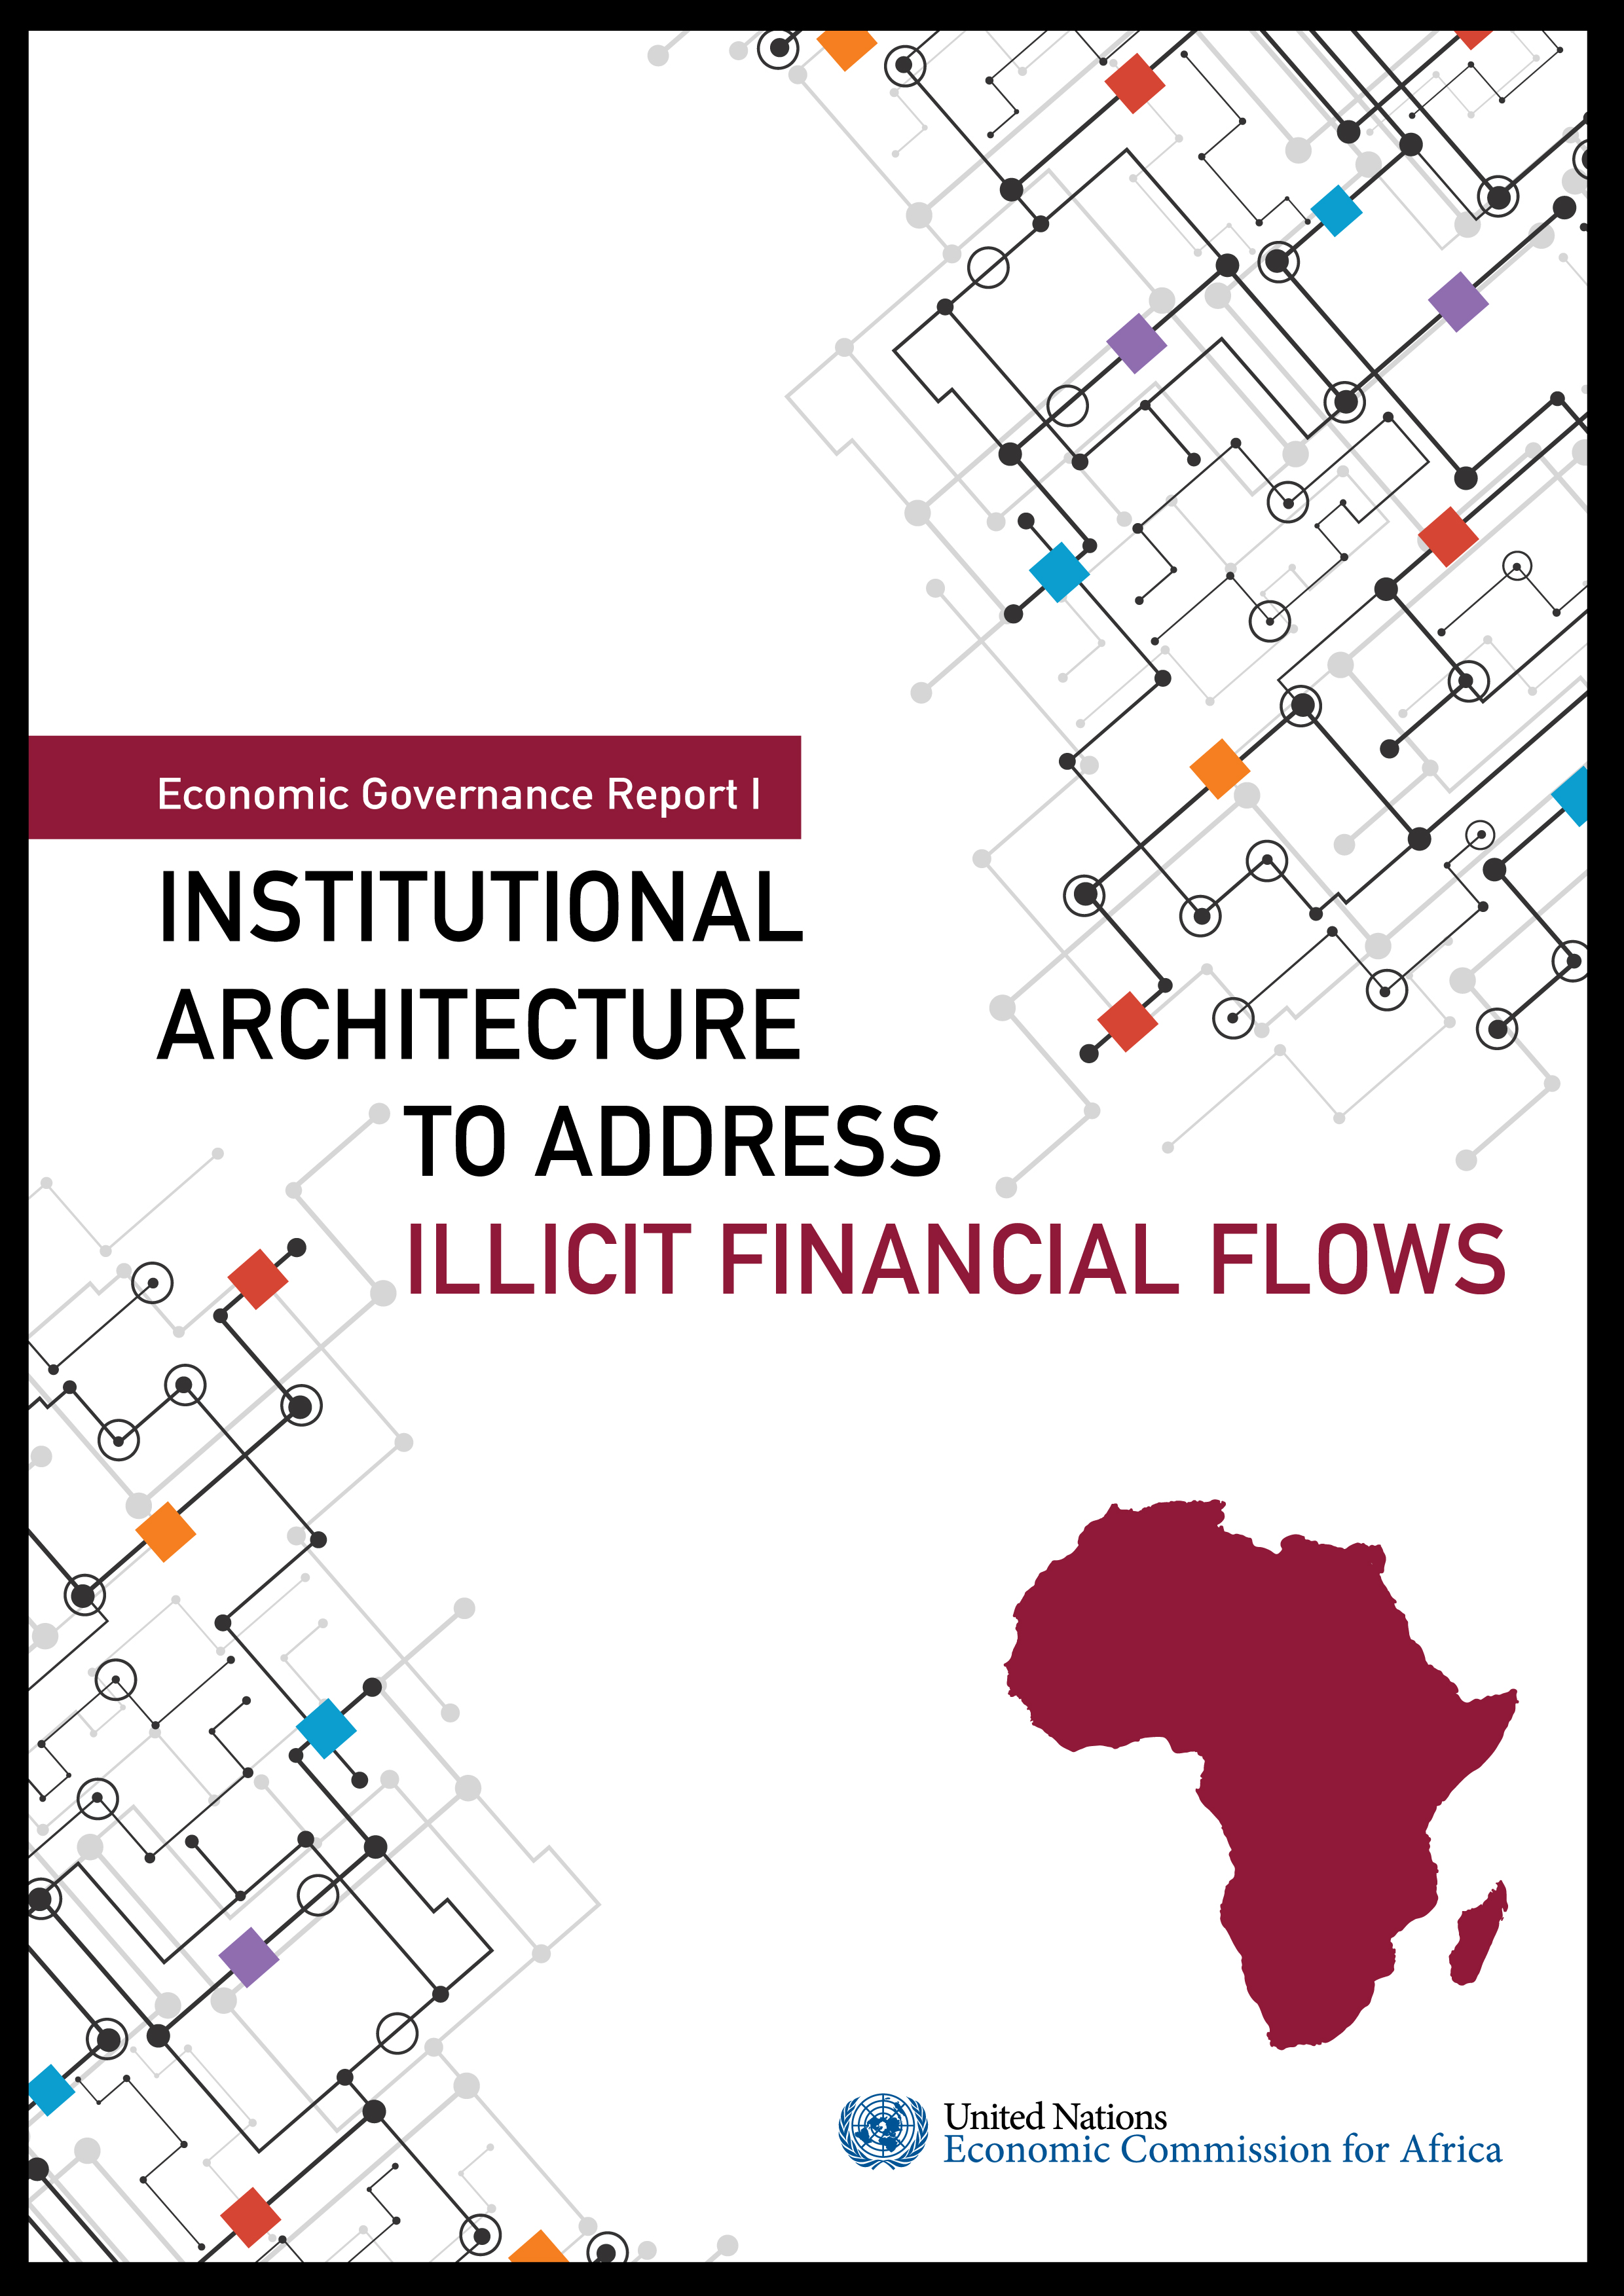 image of Economic Governance Report I: Institutional Architecture to Address Illicit Financial Flows